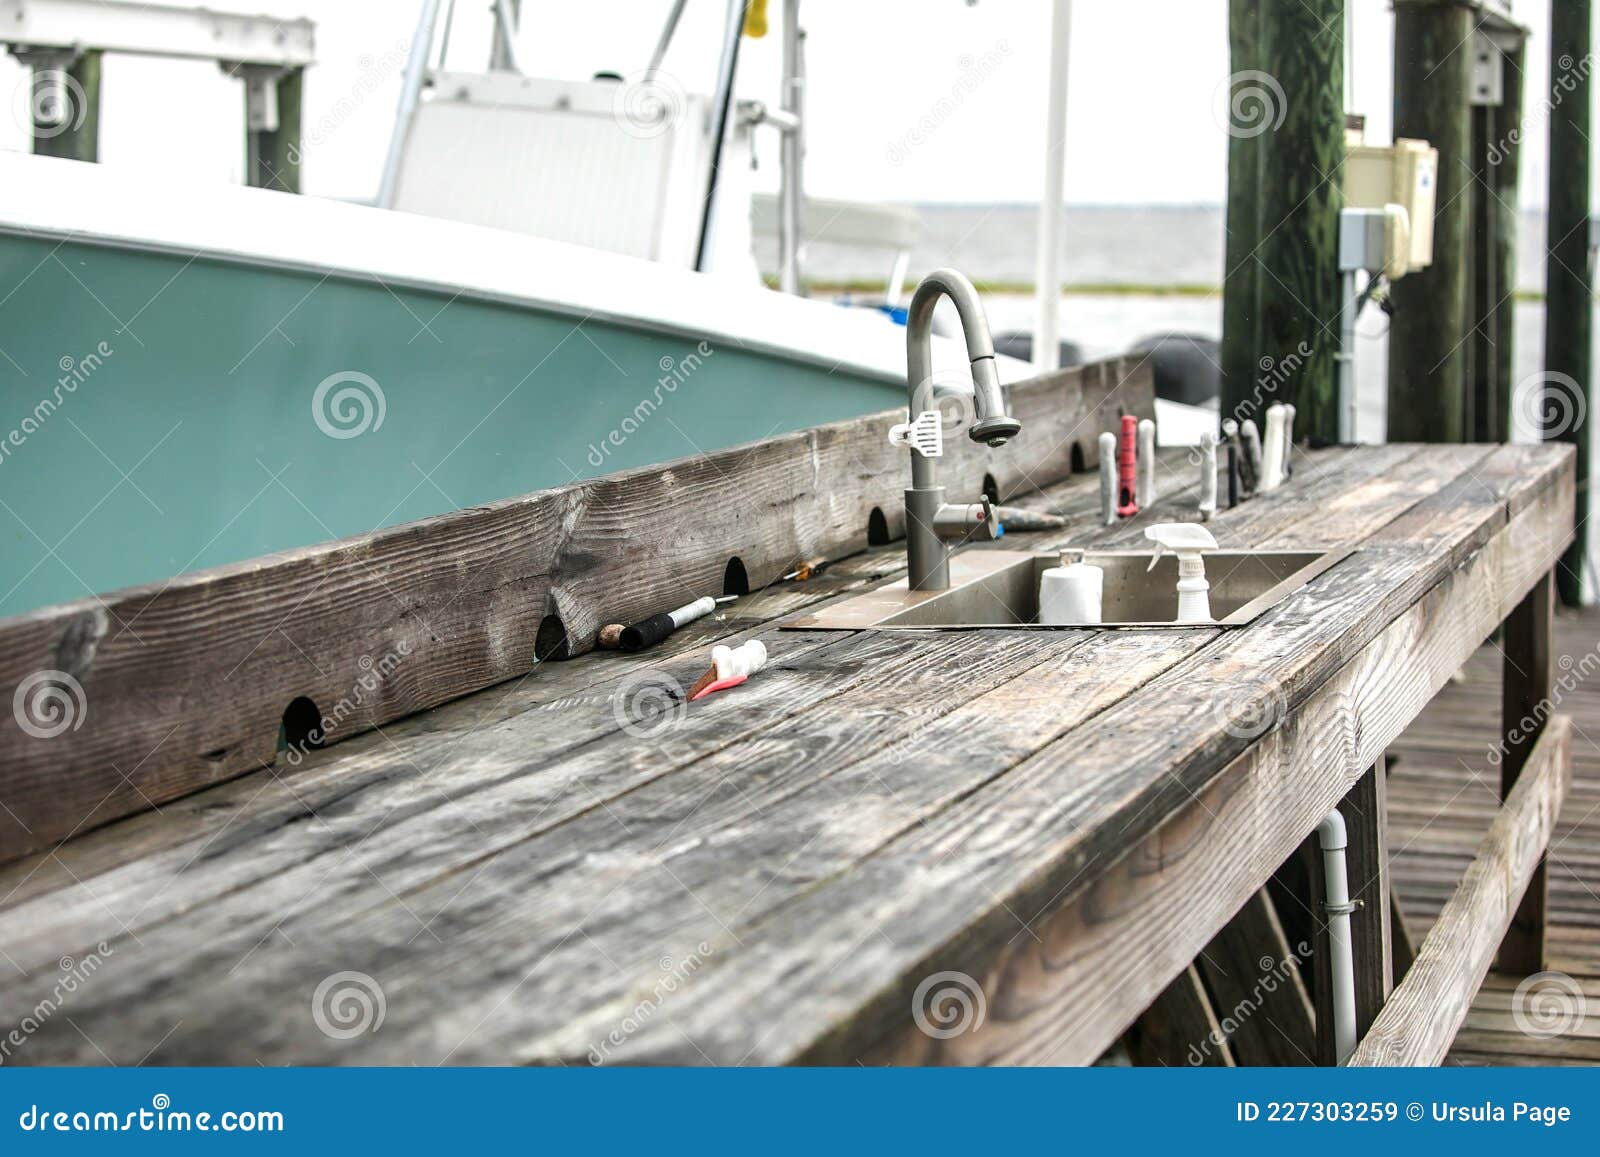 An Old Rustic and Worn Wood Fish Cleaning Station on the Dock of a